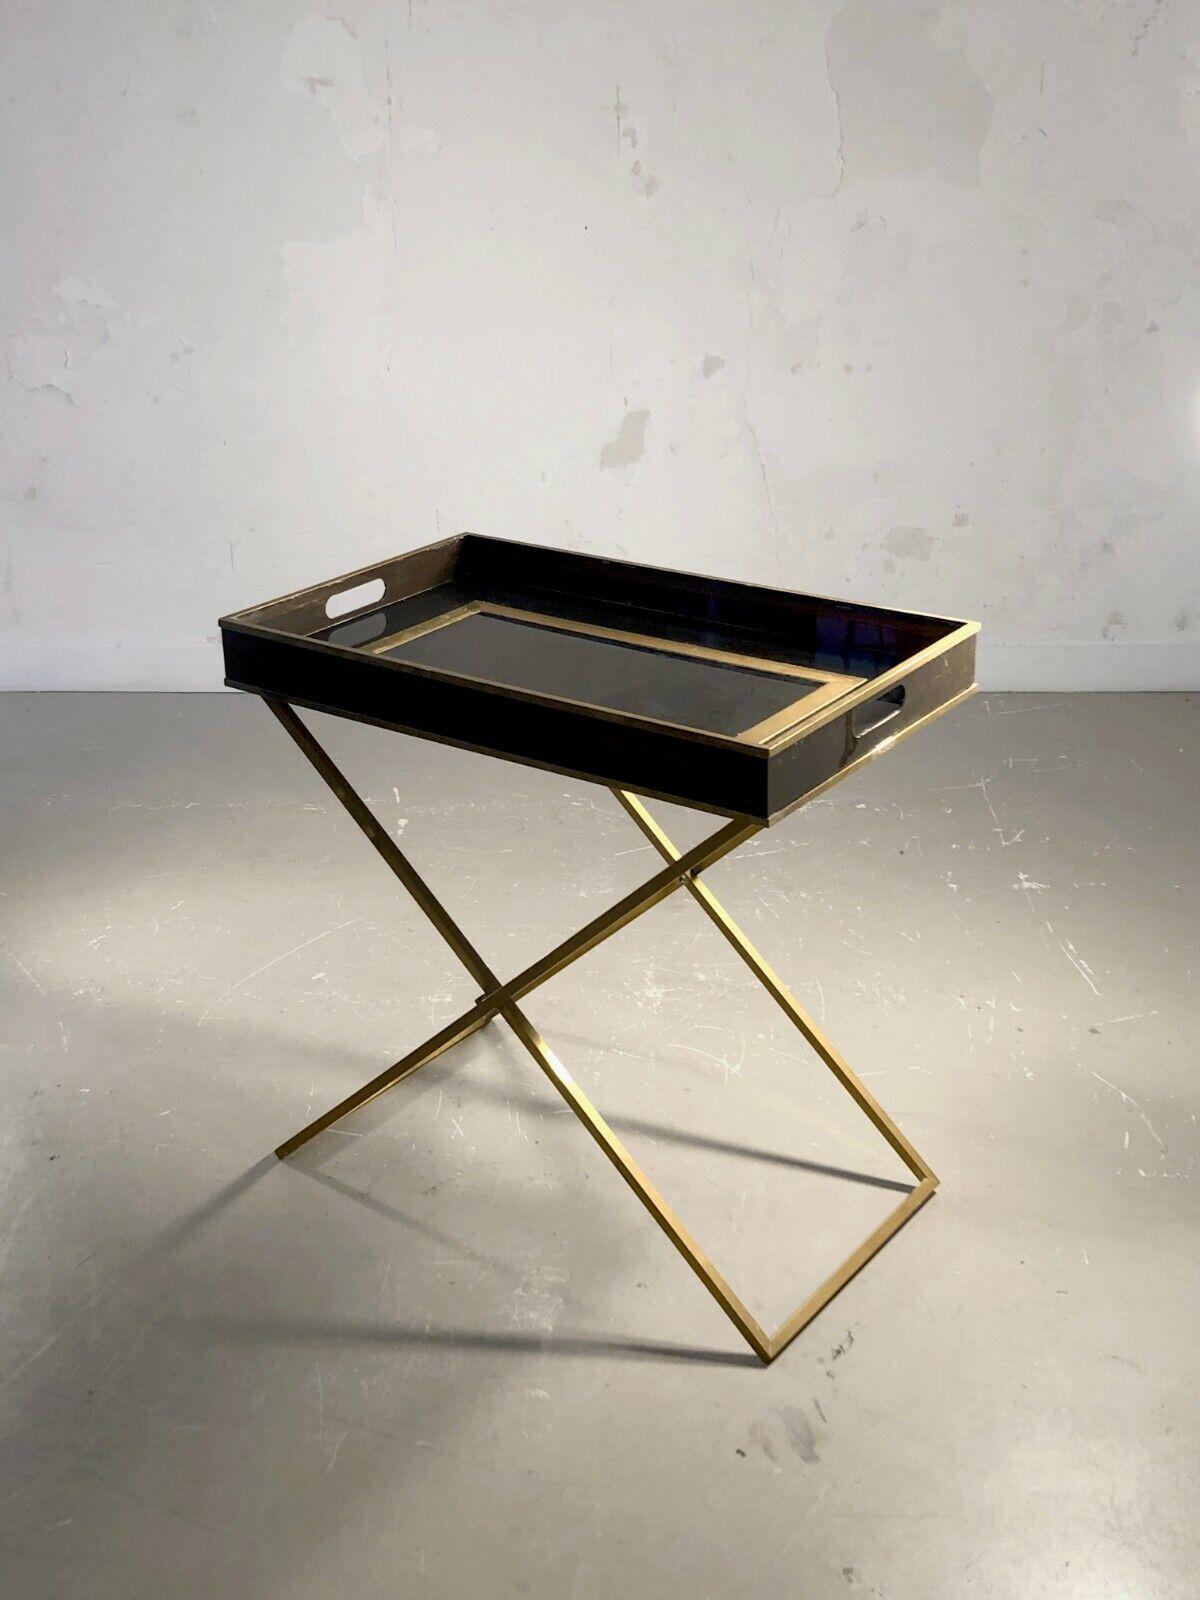 An elegant, chic and clever side table or folding server with removable top, Post-Modernist, Shabby-Chic, 